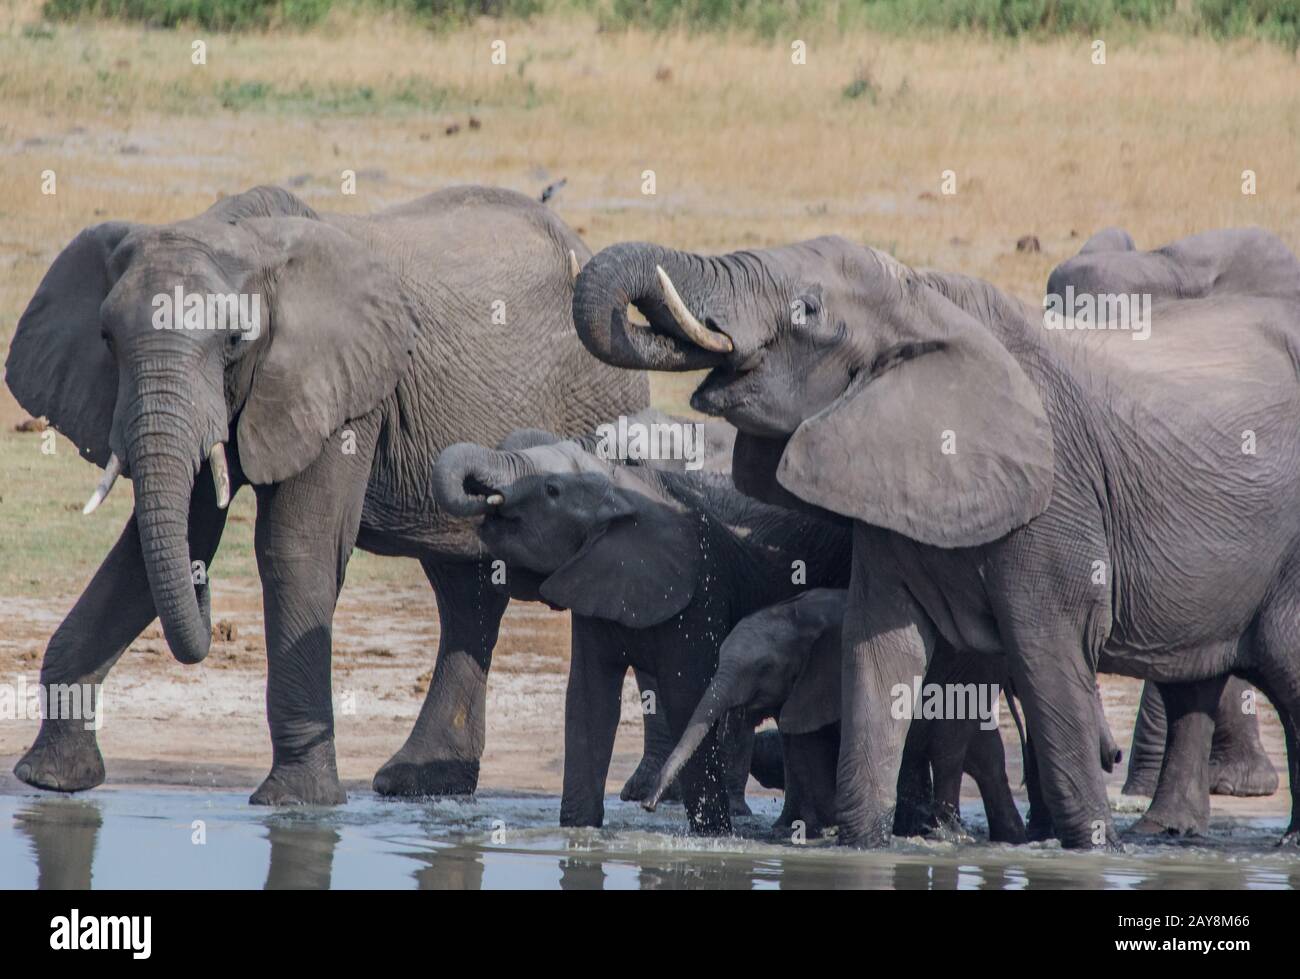 Elephants in the savanna of in Zimbabwe, South Africa Stock Photo